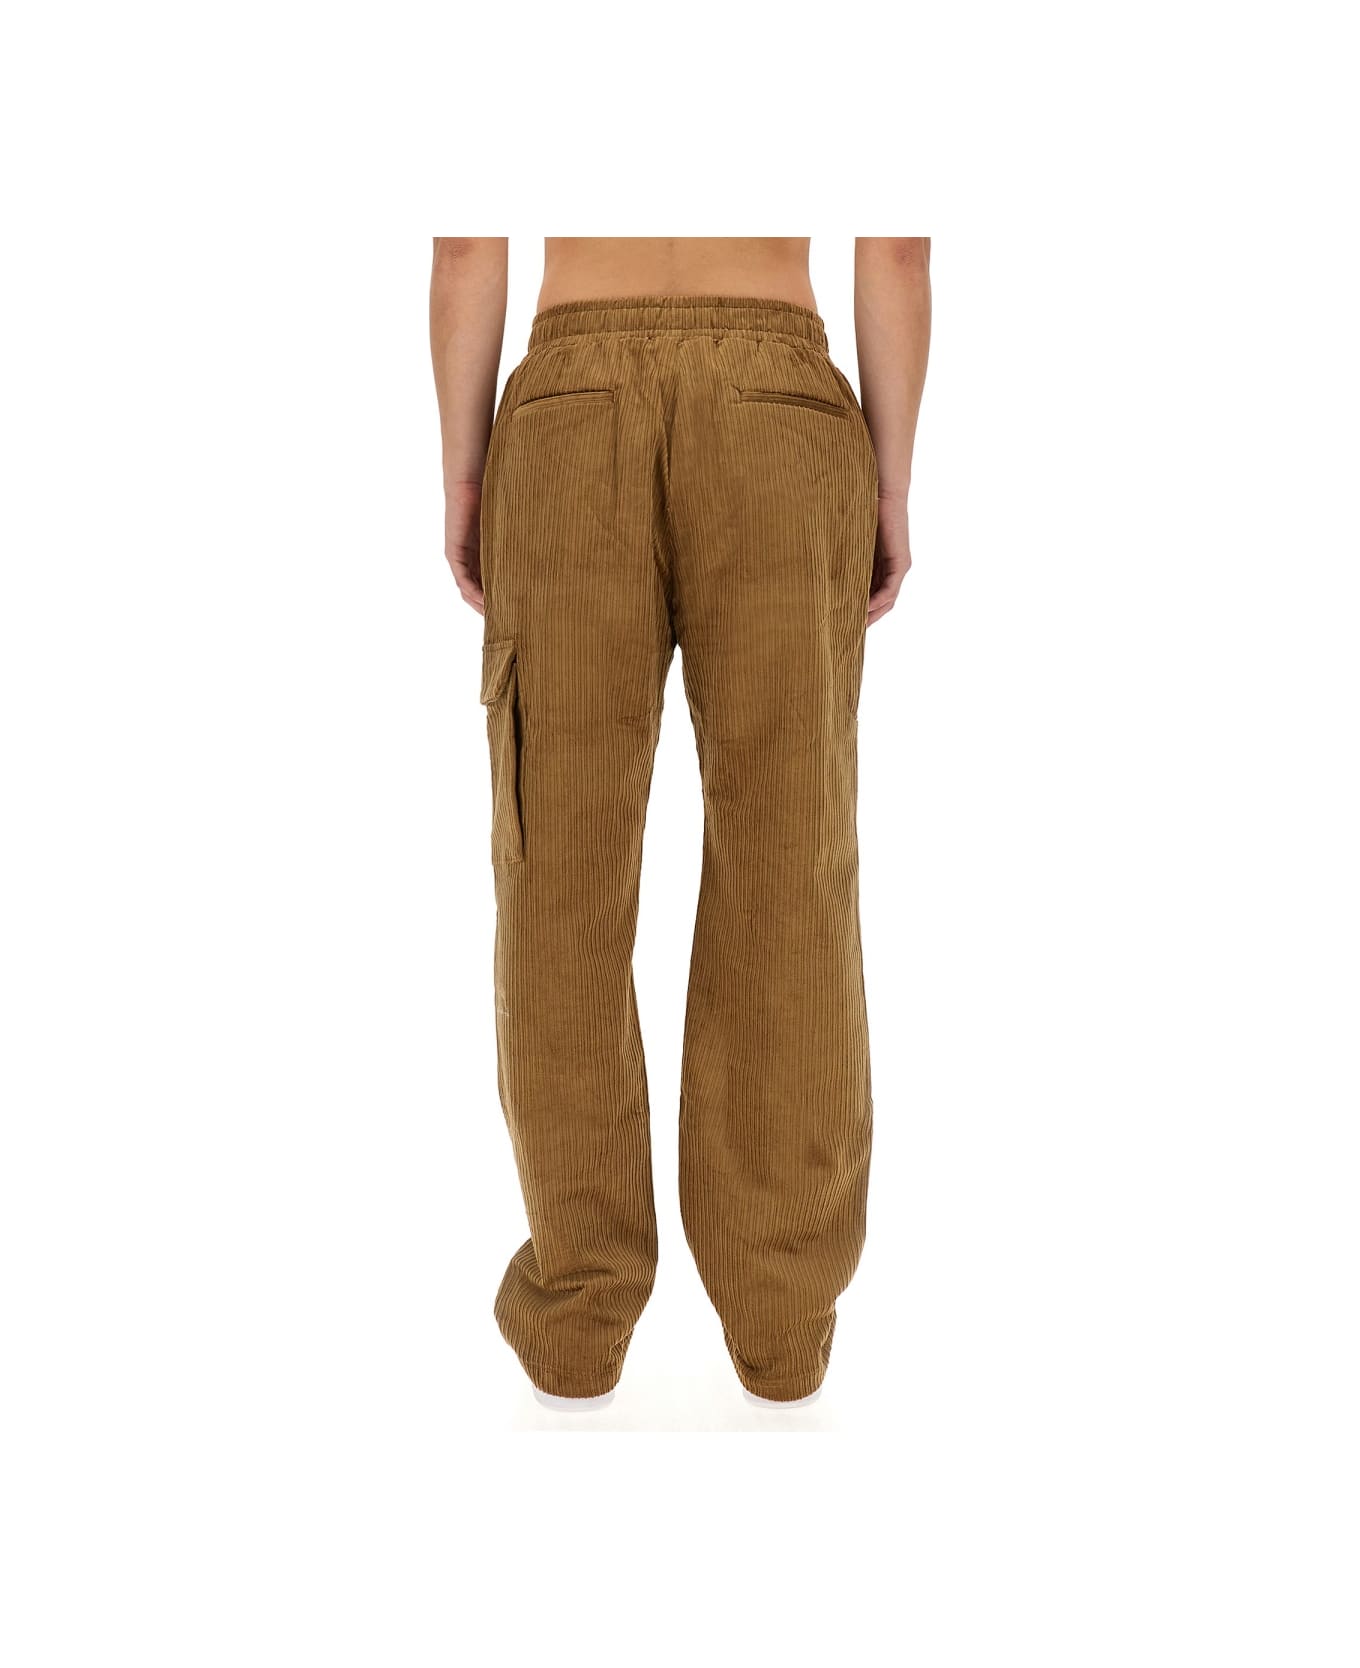 Family First Milano Cargo Pants - BEIGE ボトムス